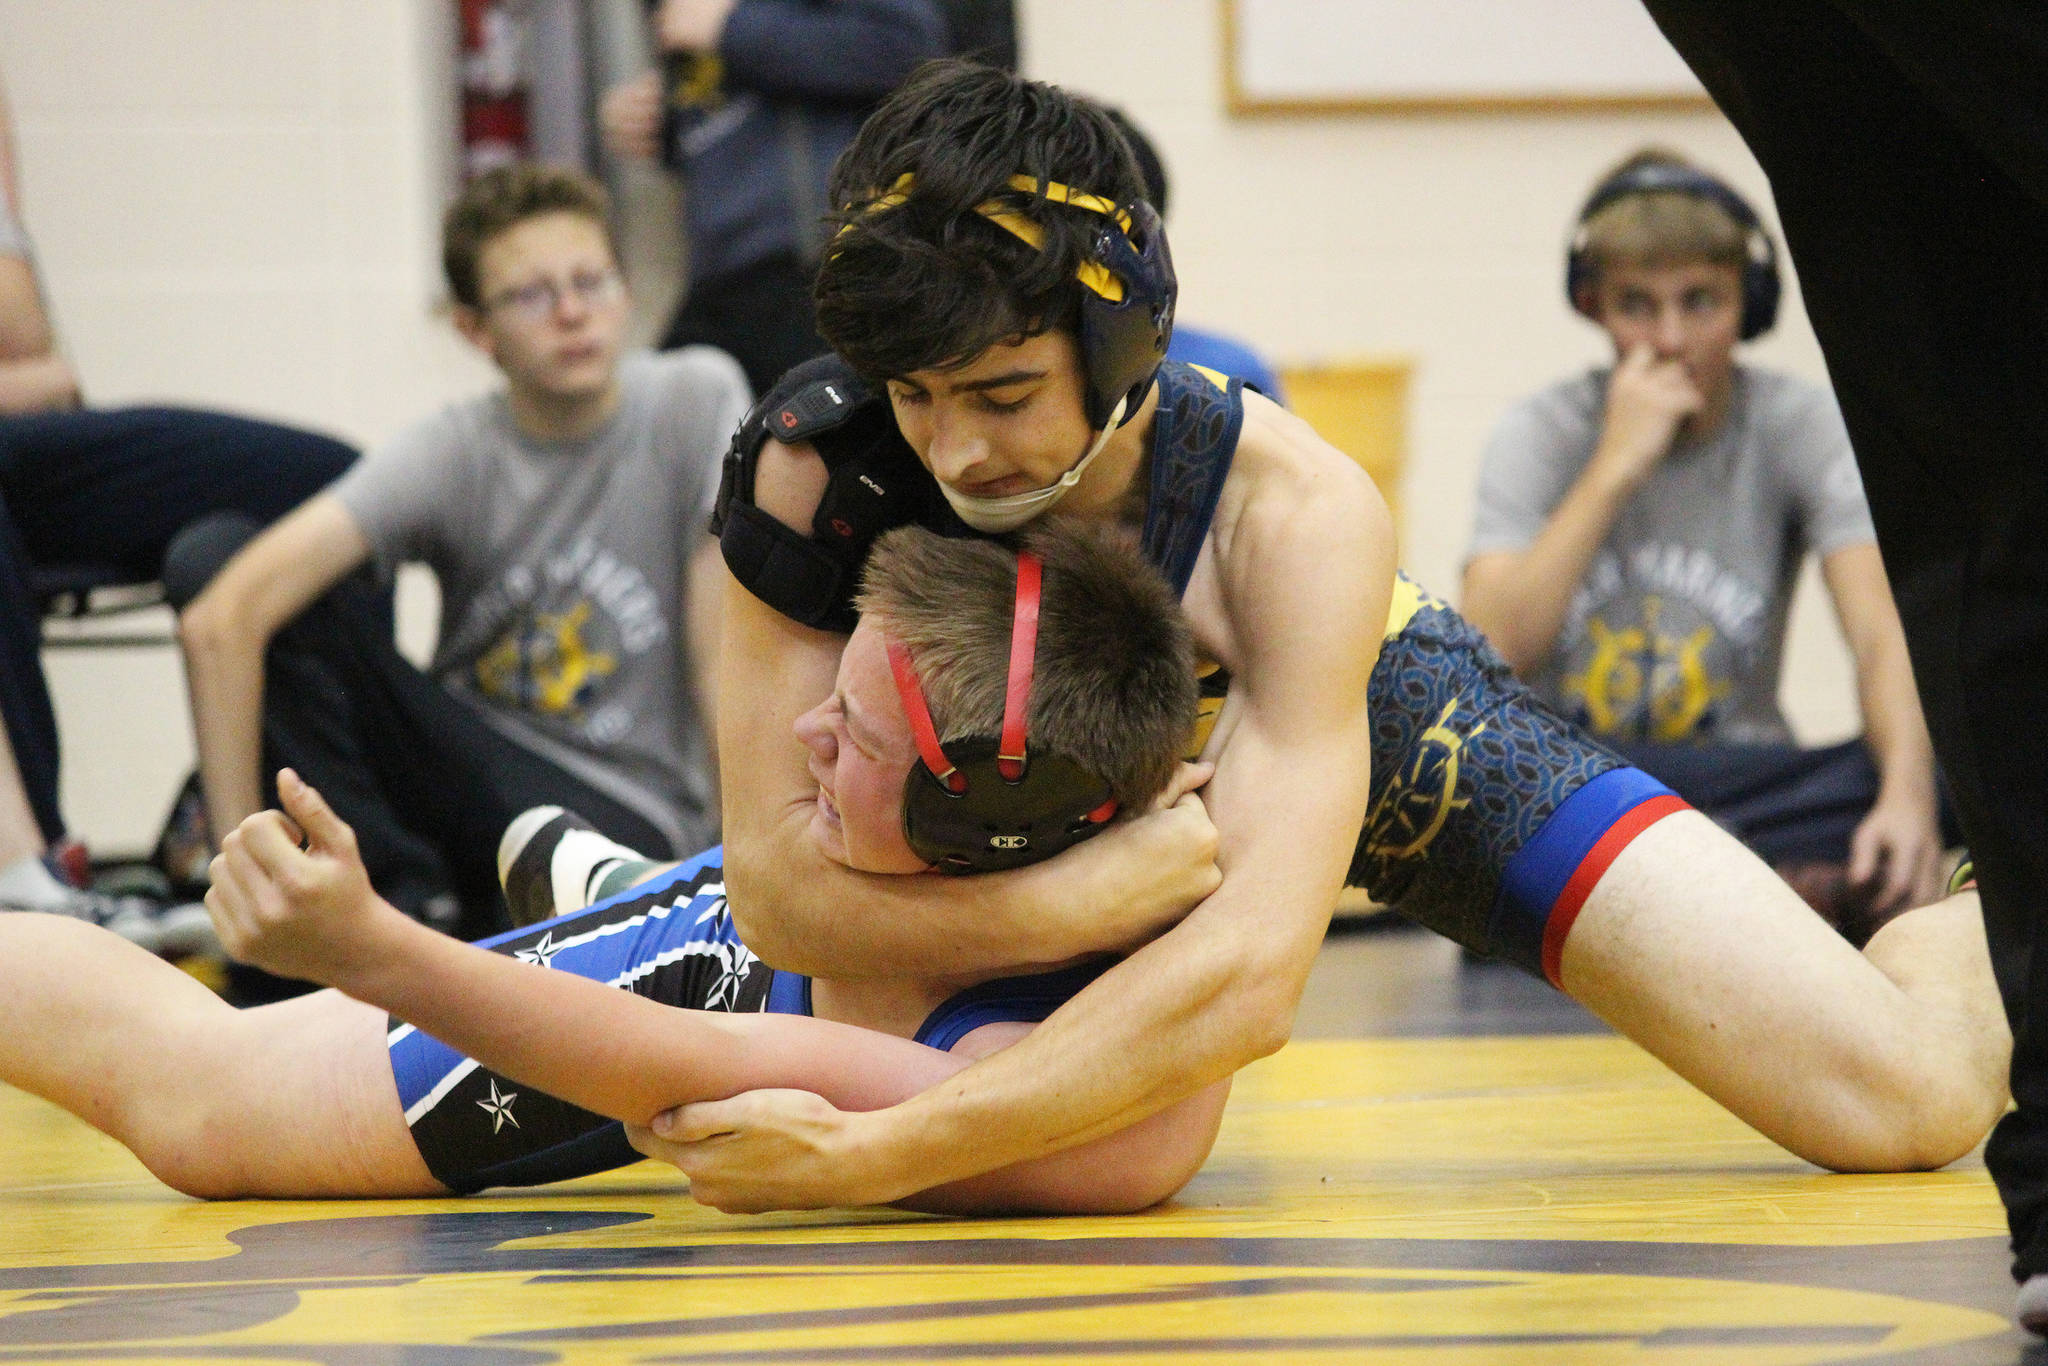 Homer’s David Weisser holds Soldotna’s Brian Kuhr in a head lock while they wrestle Friday, Oct. 19, 2018 at Homer High School in Homer, Alaska. (Photo by Megan Pacer/Homer News)